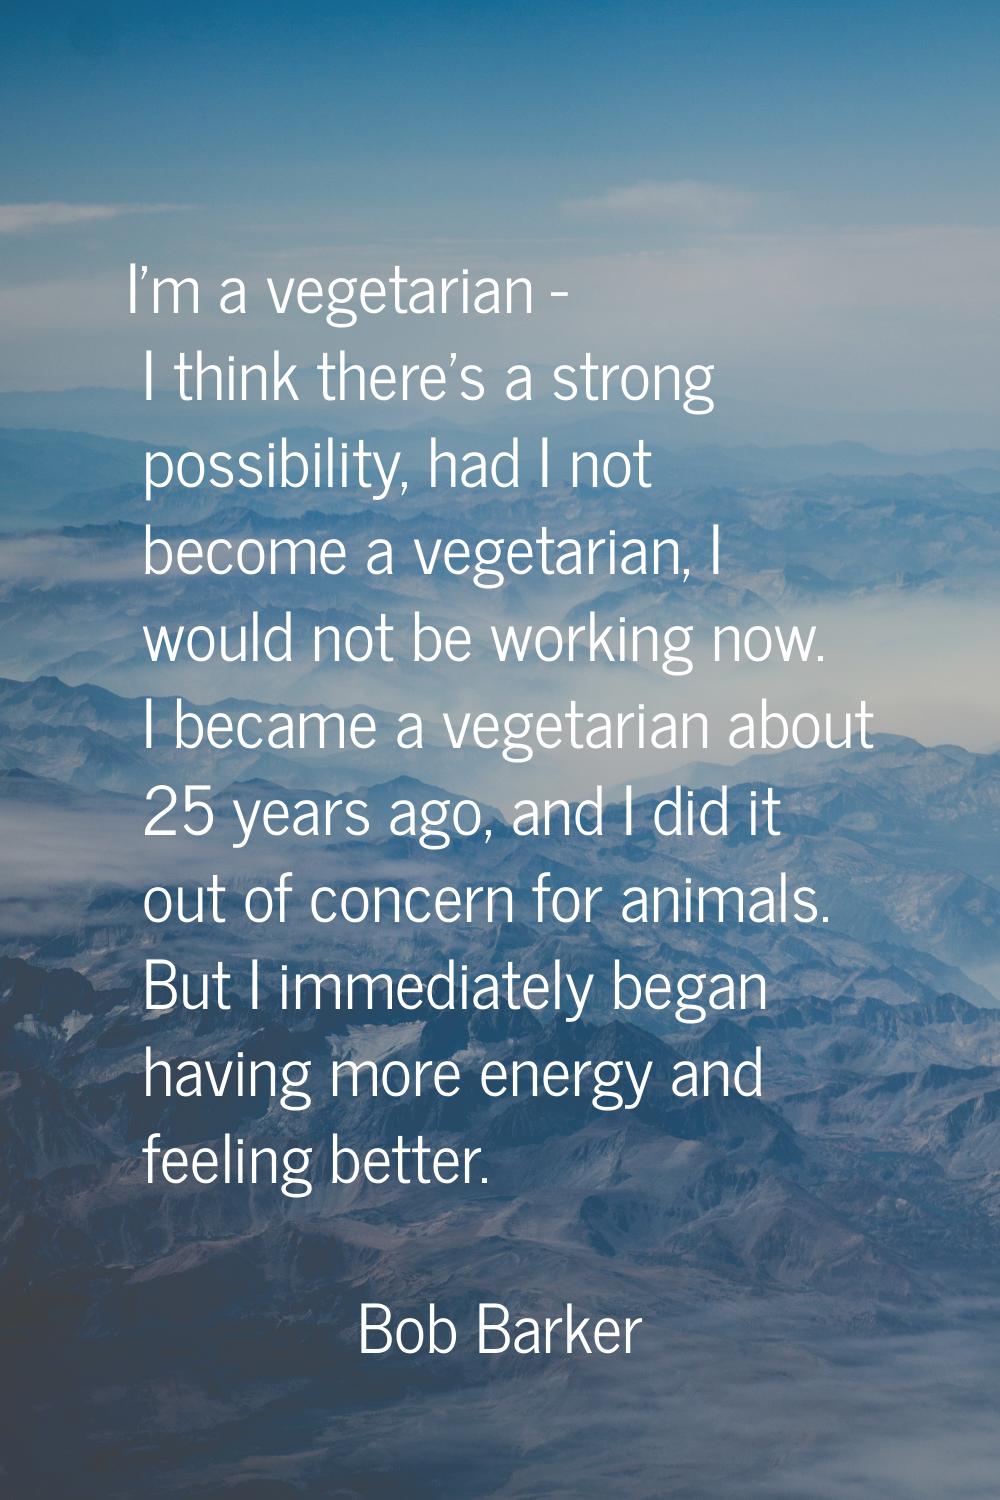 I'm a vegetarian - I think there's a strong possibility, had I not become a vegetarian, I would not